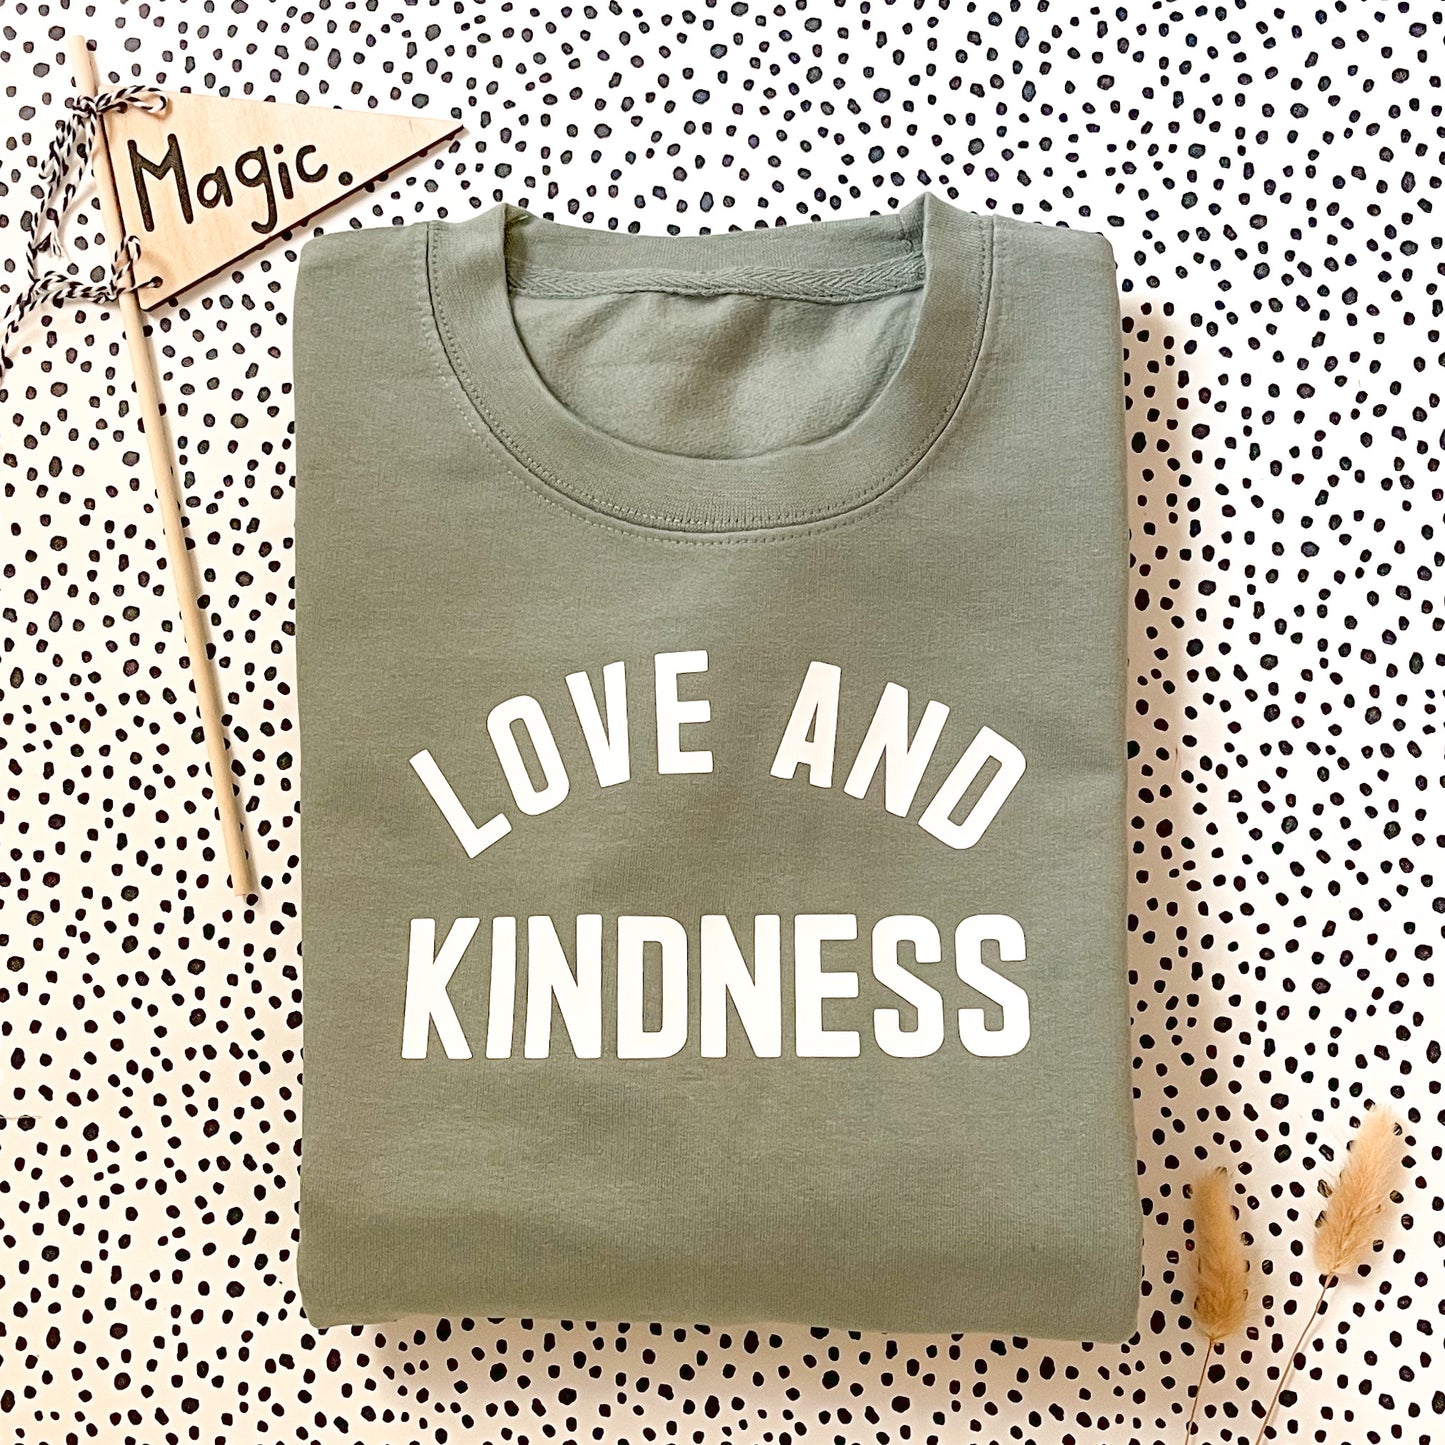 Love And Kindness Sweater (White Vinyl)